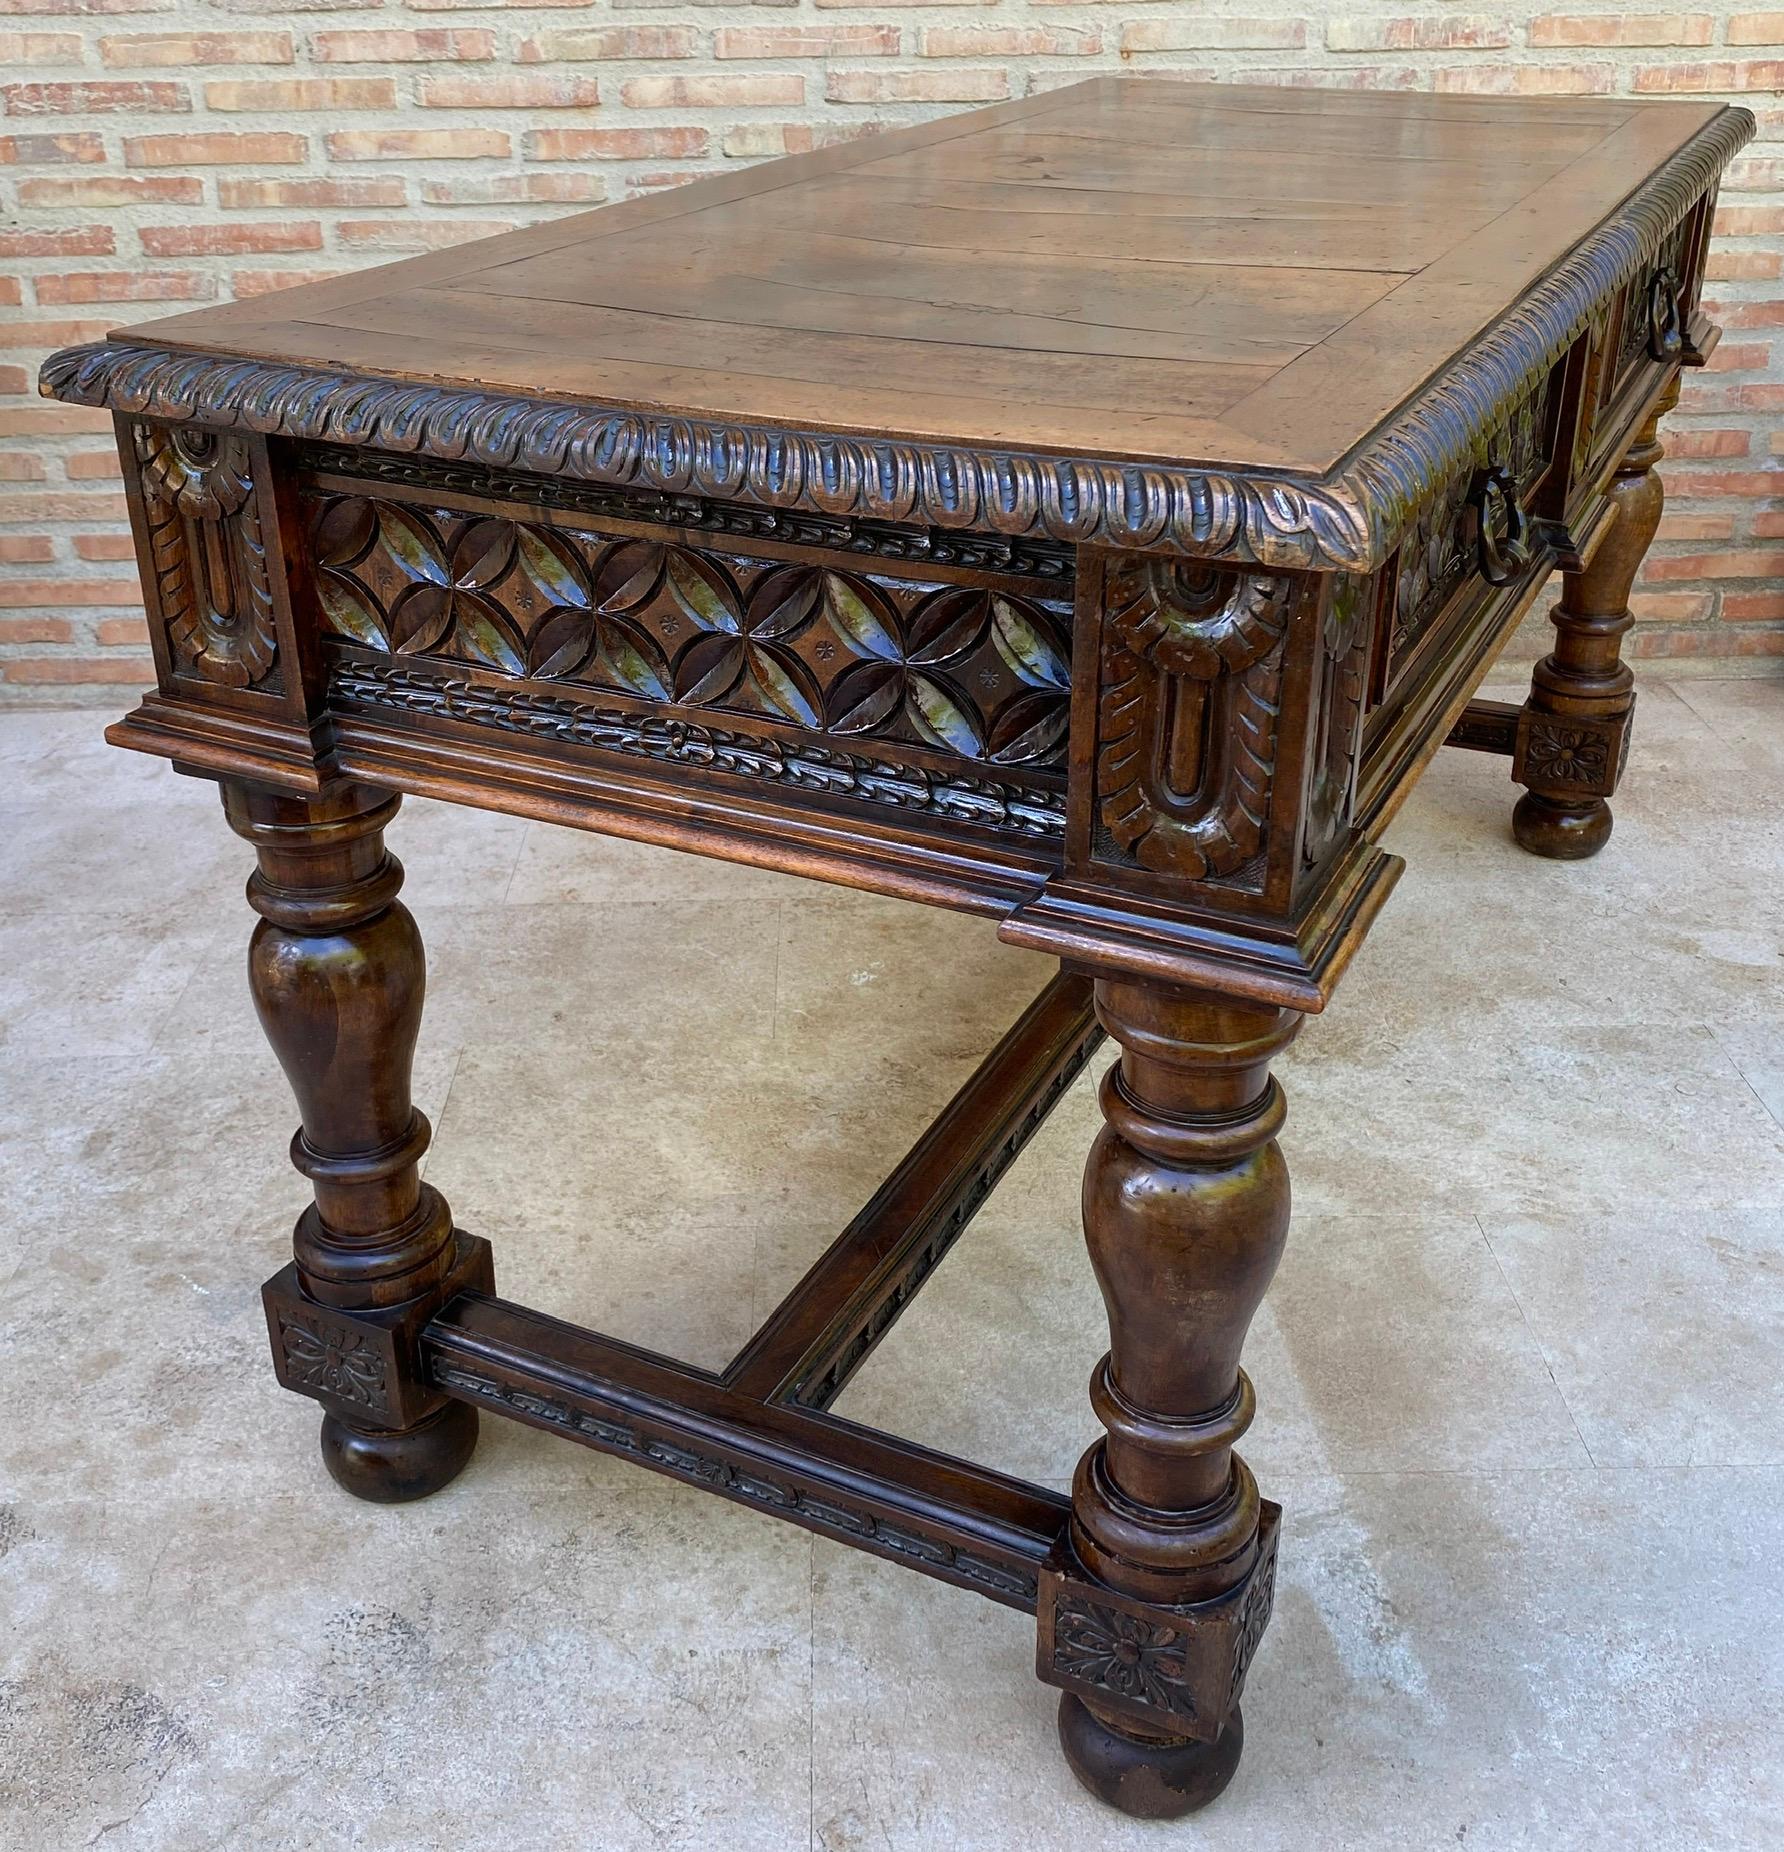 19th Century Spanish Walnut Desk with Two Drawers & Strong Legs, 1890s For Sale 5